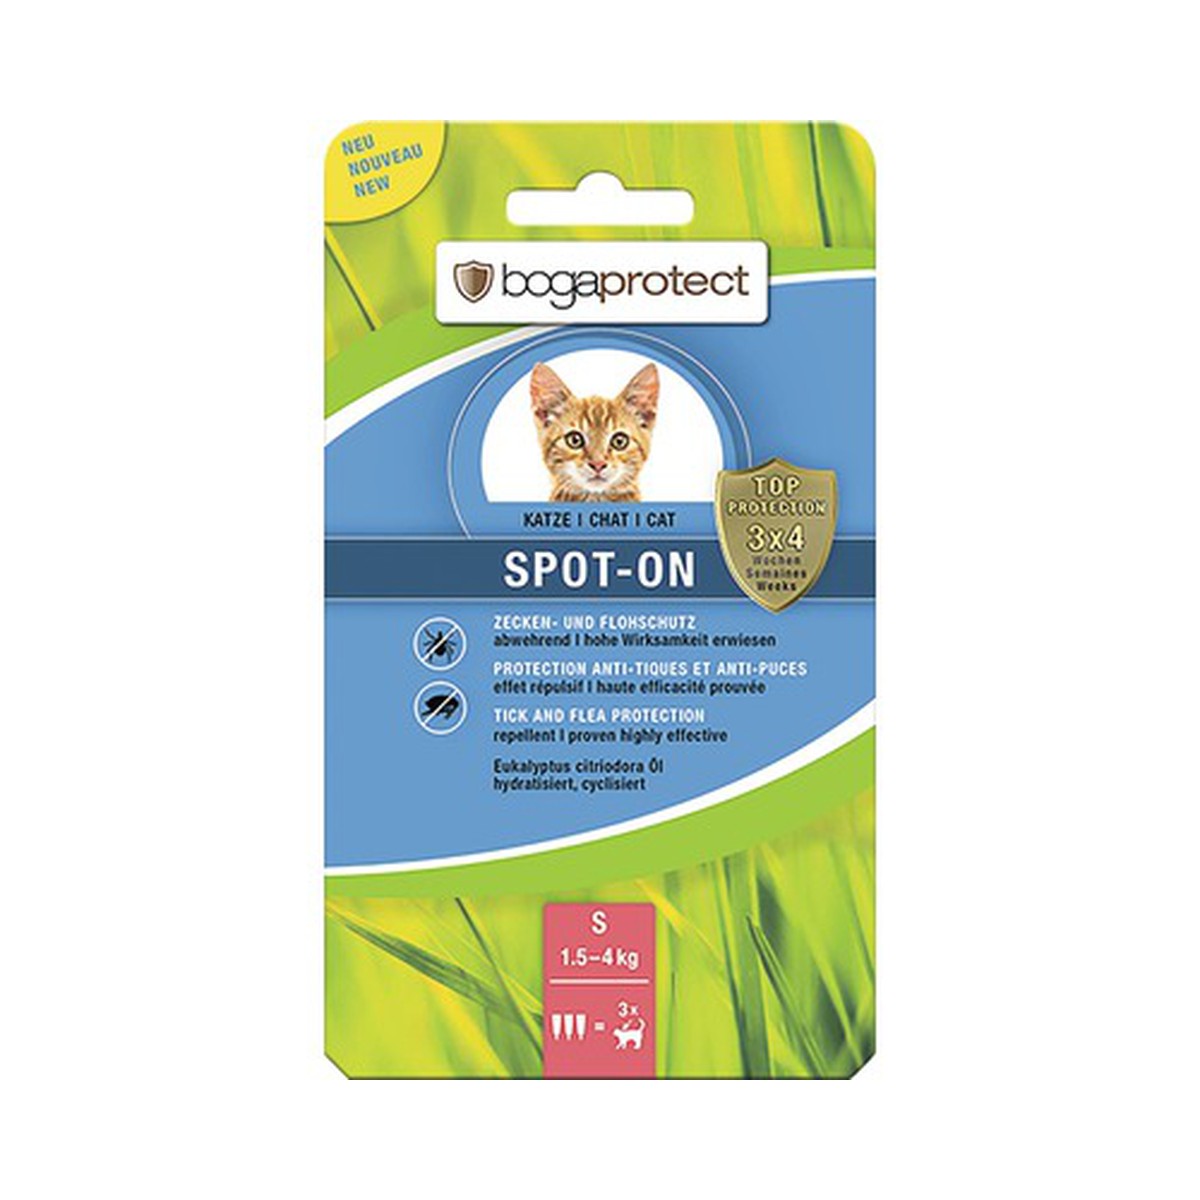   Bogaprotect Spot-On chat S  3x0.7ml